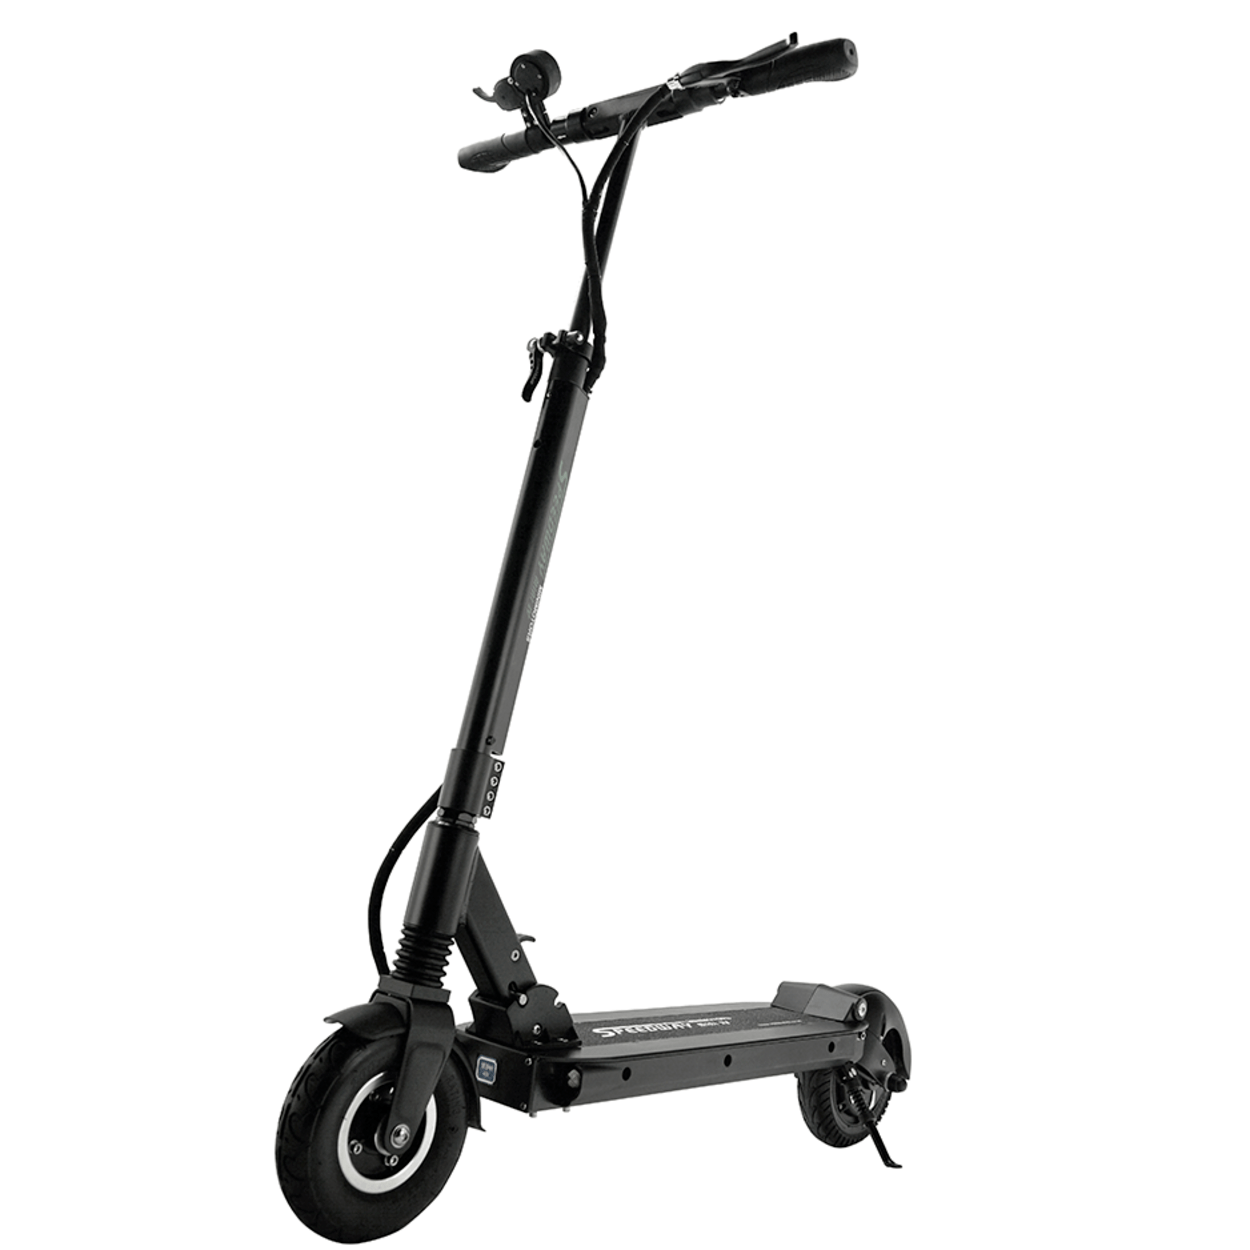 Speedway Mini 4 Pro - Most Reliable Electric Scooter - Last Mile